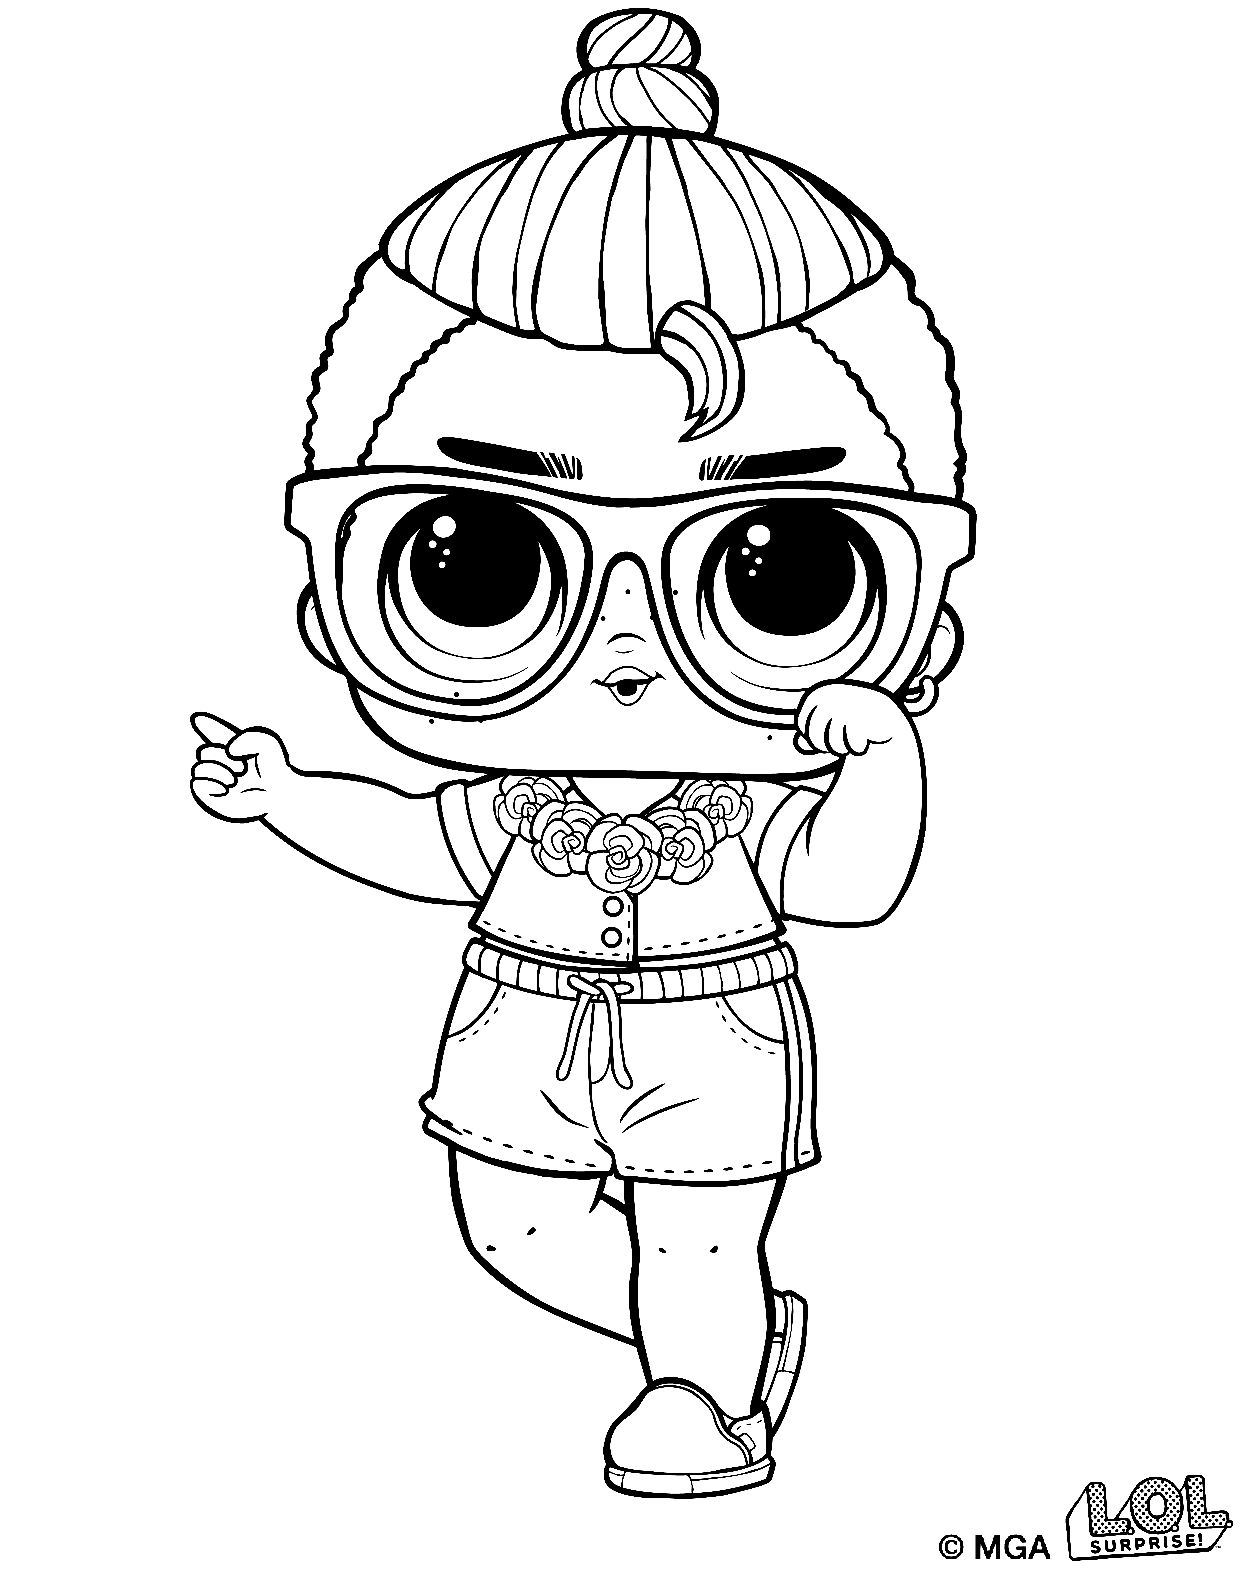 Luau Lol Surprise Doll Coloring Page